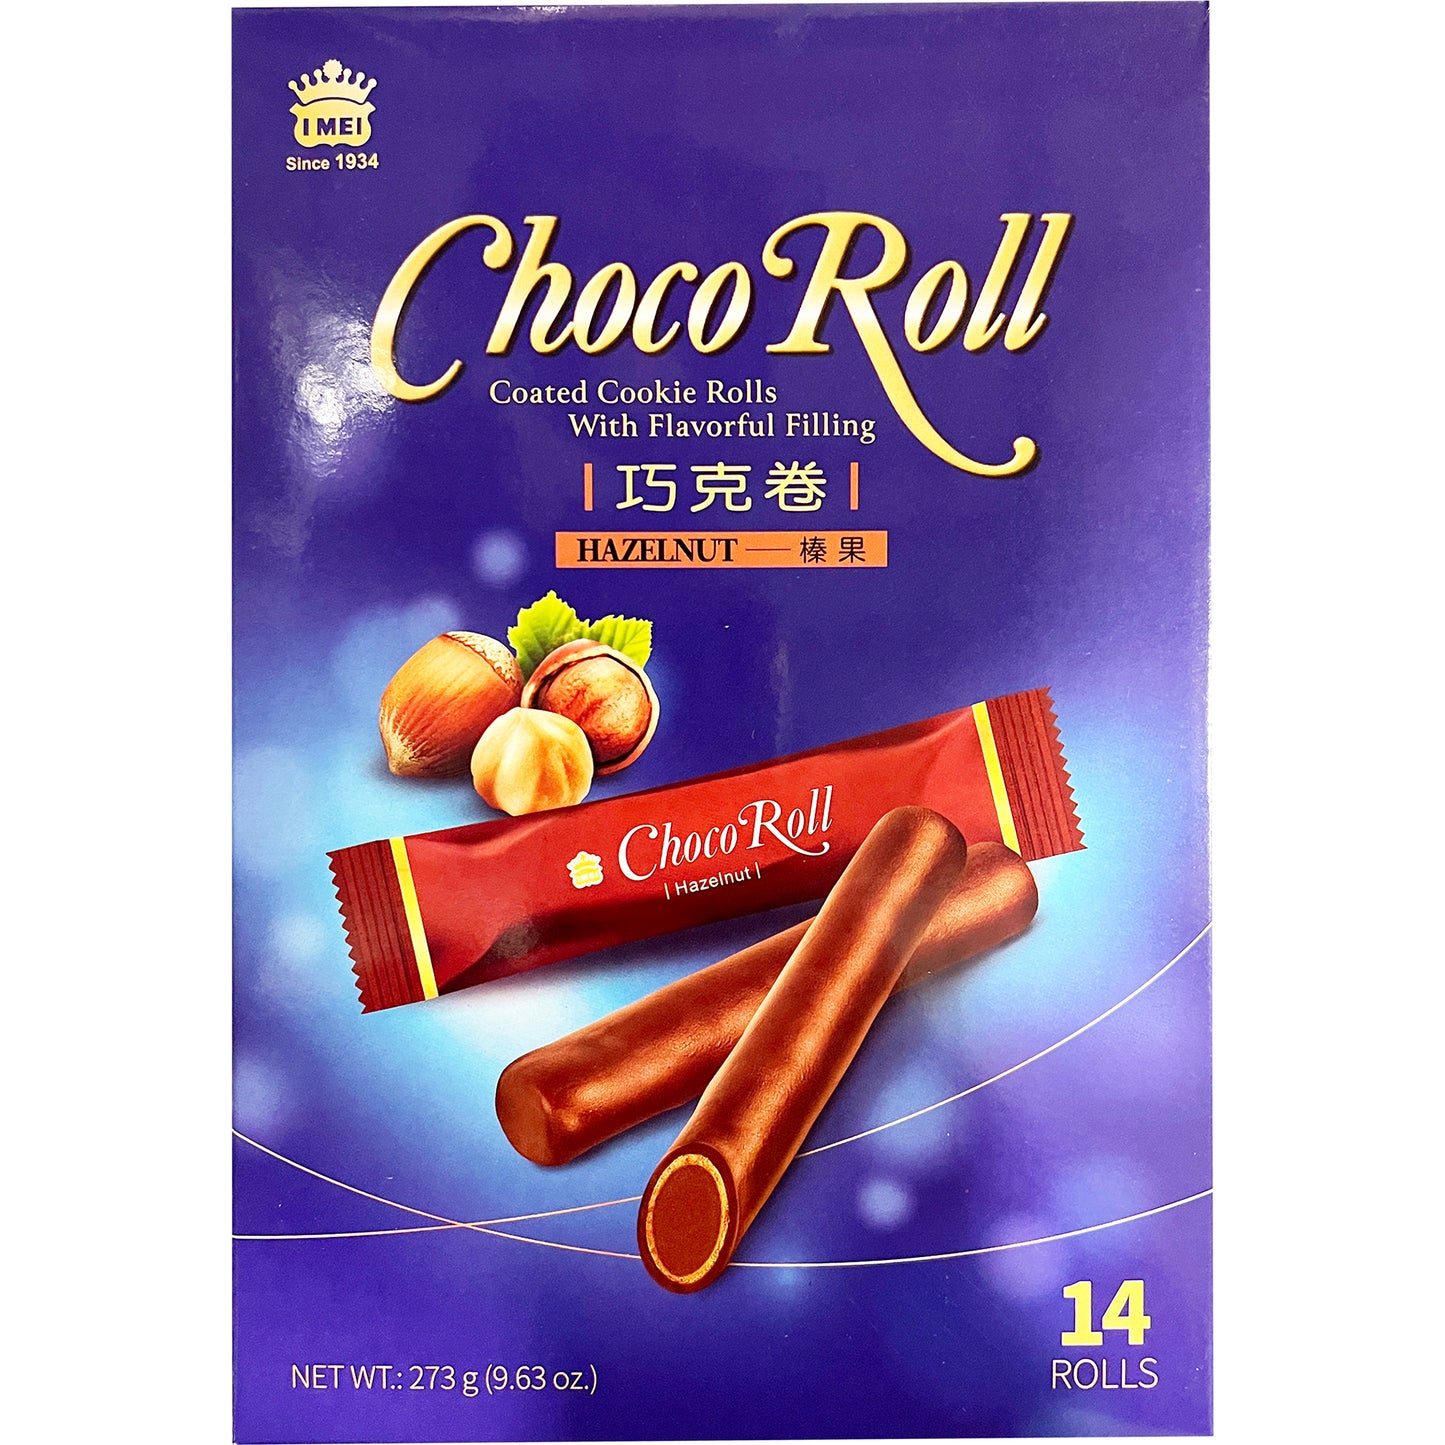 Choco Roll Cookies - Various Flavors  Family Pack Size 14 Individually Wrapped Cookies Per Box